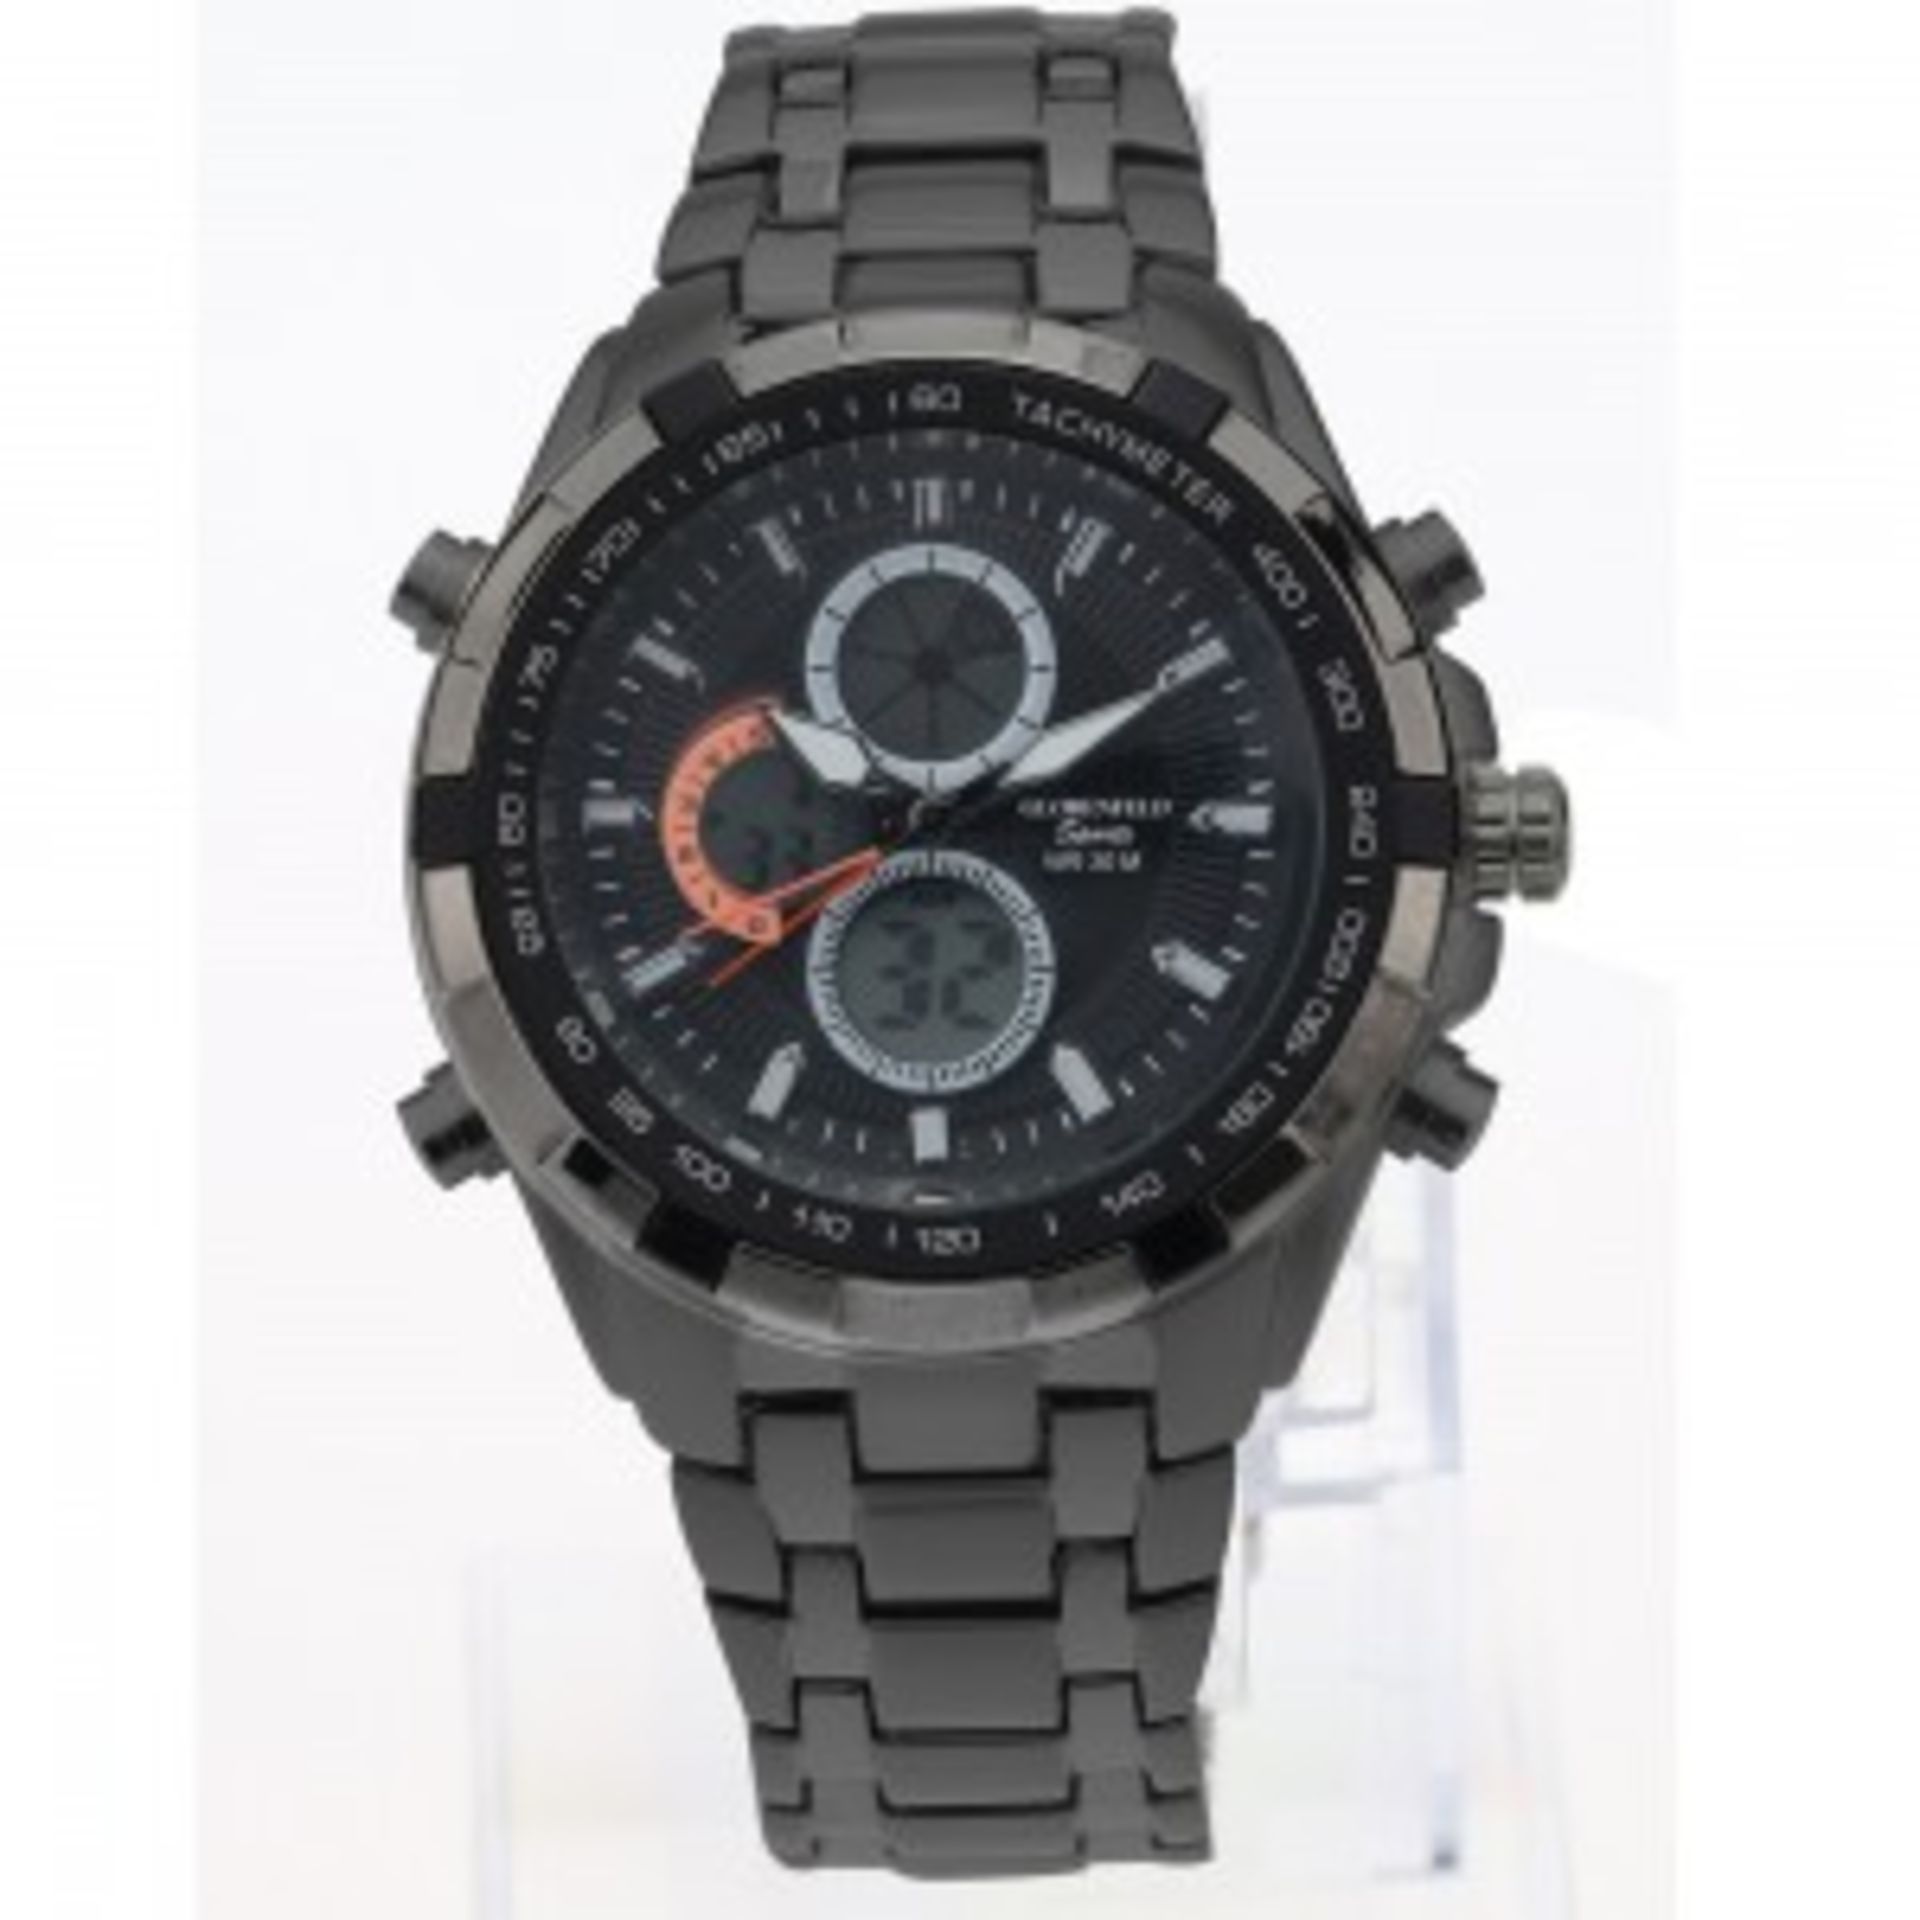 V Brand New Gents Globenfeld Black Sports Watch RRP 440.00 With Box - Warranty - Papers Etc